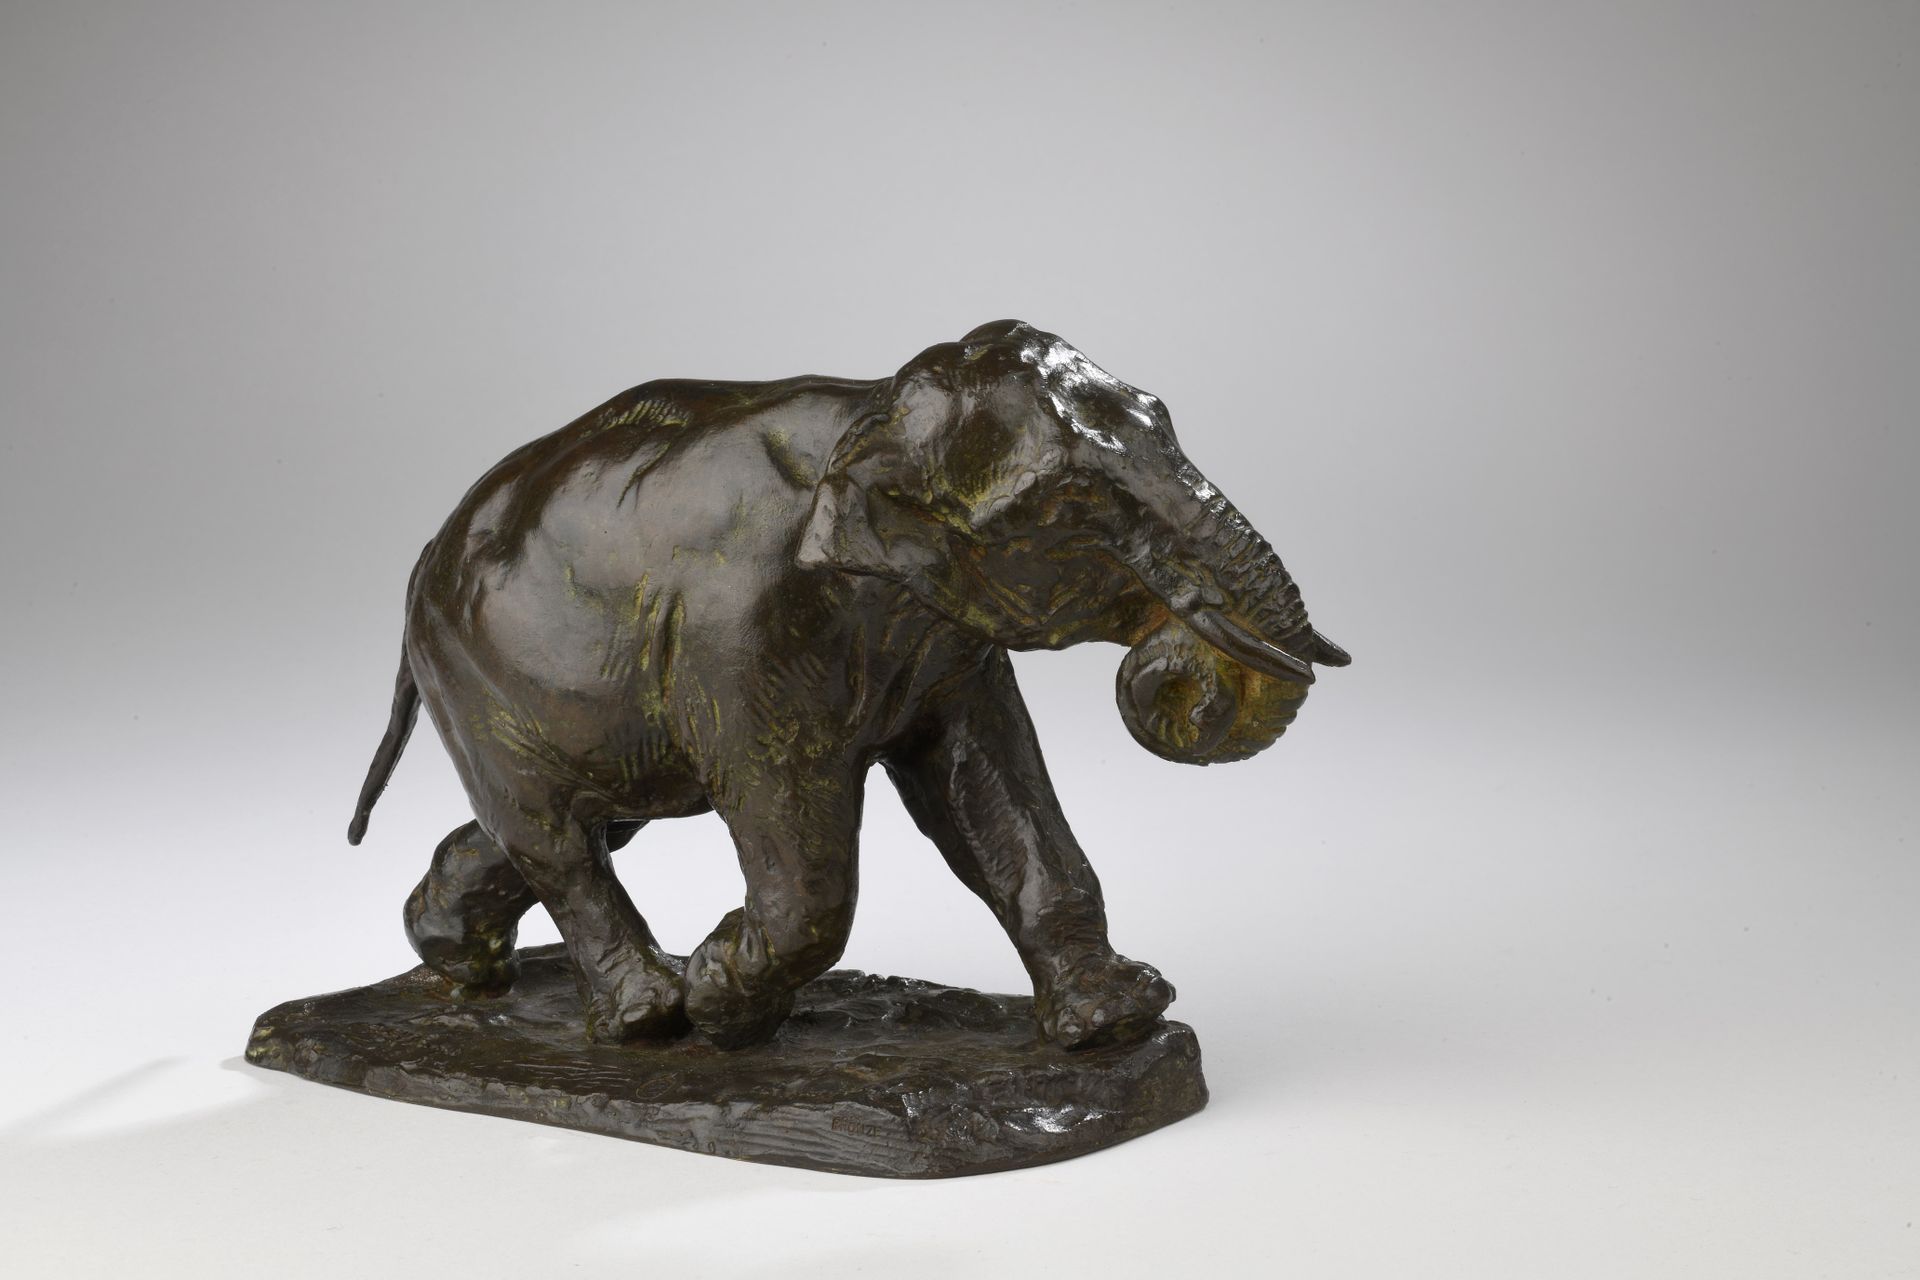 Null Roger Godchaux (1878-1958)
Elephant running with coiled trunk
Bronze with s&hellip;